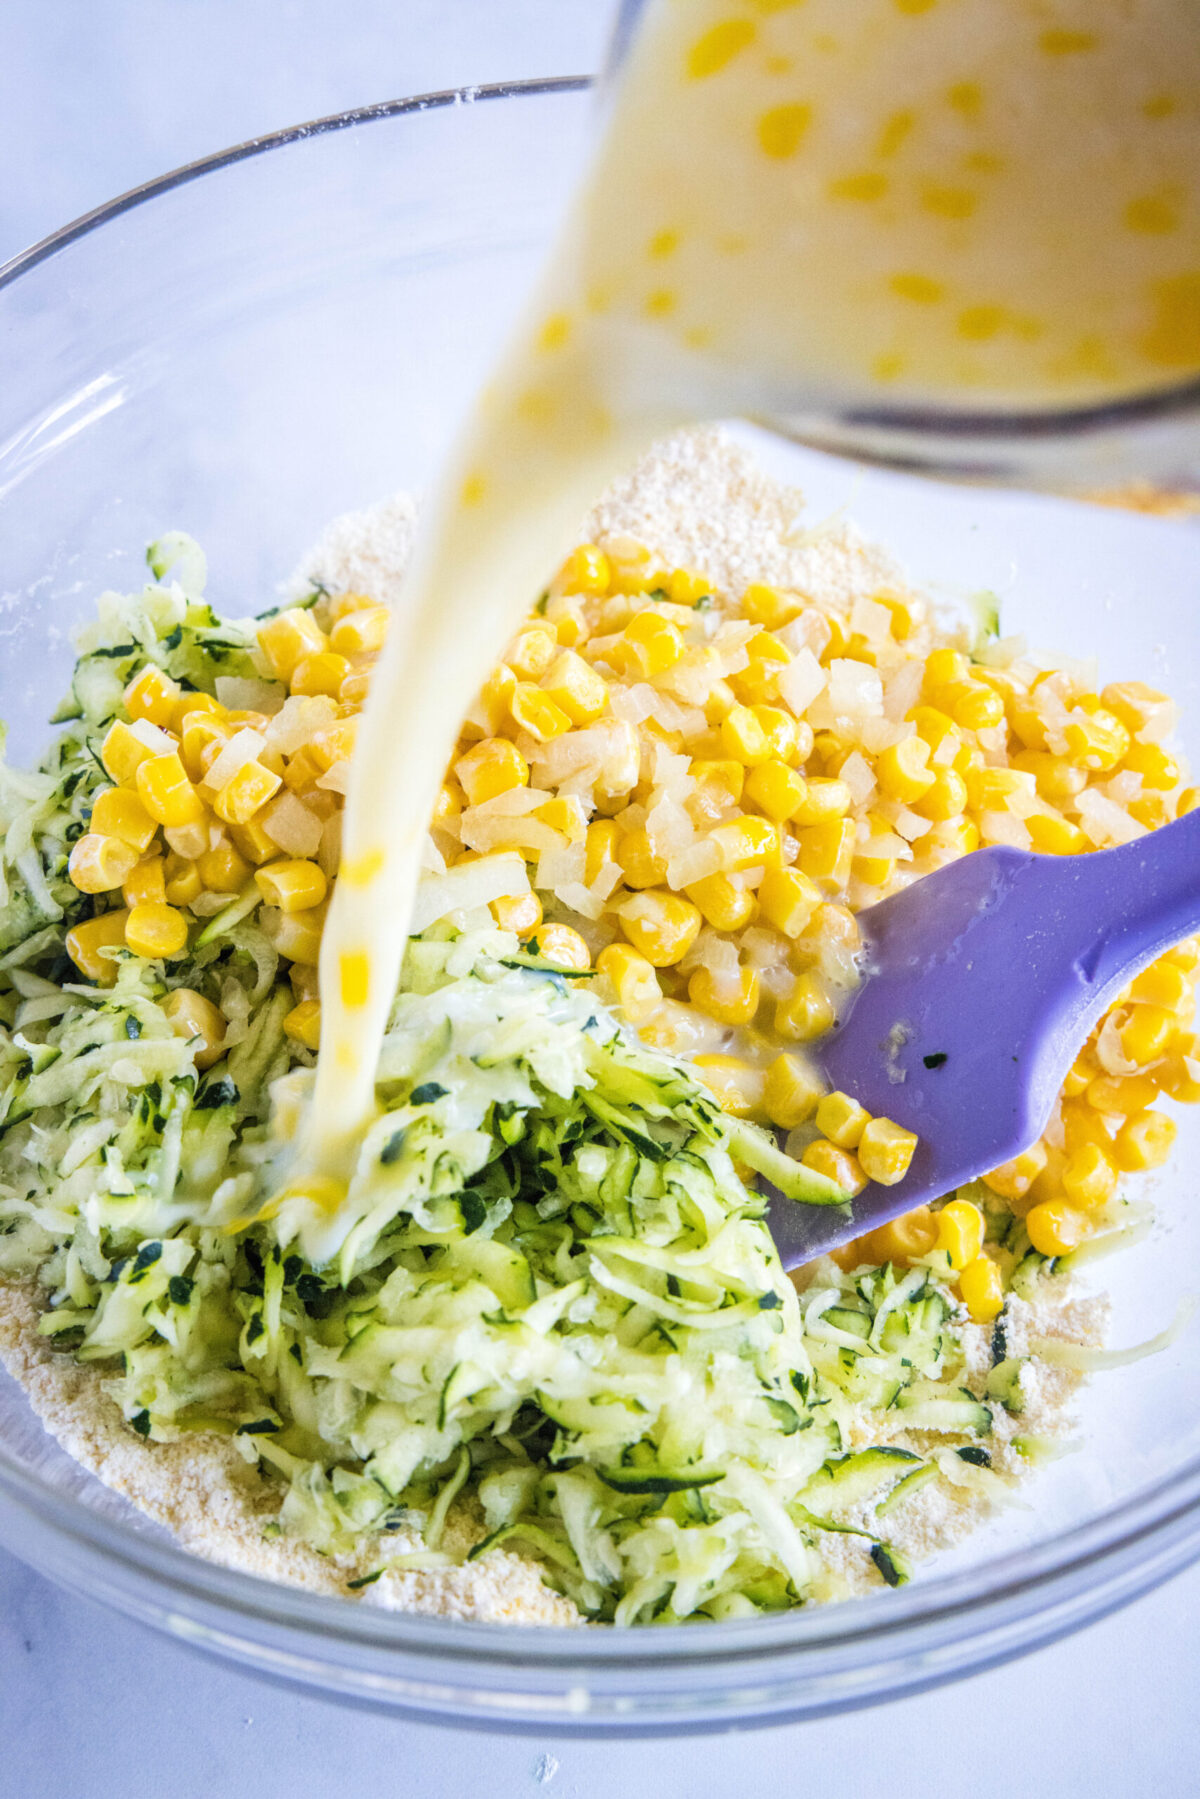 Buttermilk being poured into a mixing bowl with corn and shredded zucchini, with a spatula